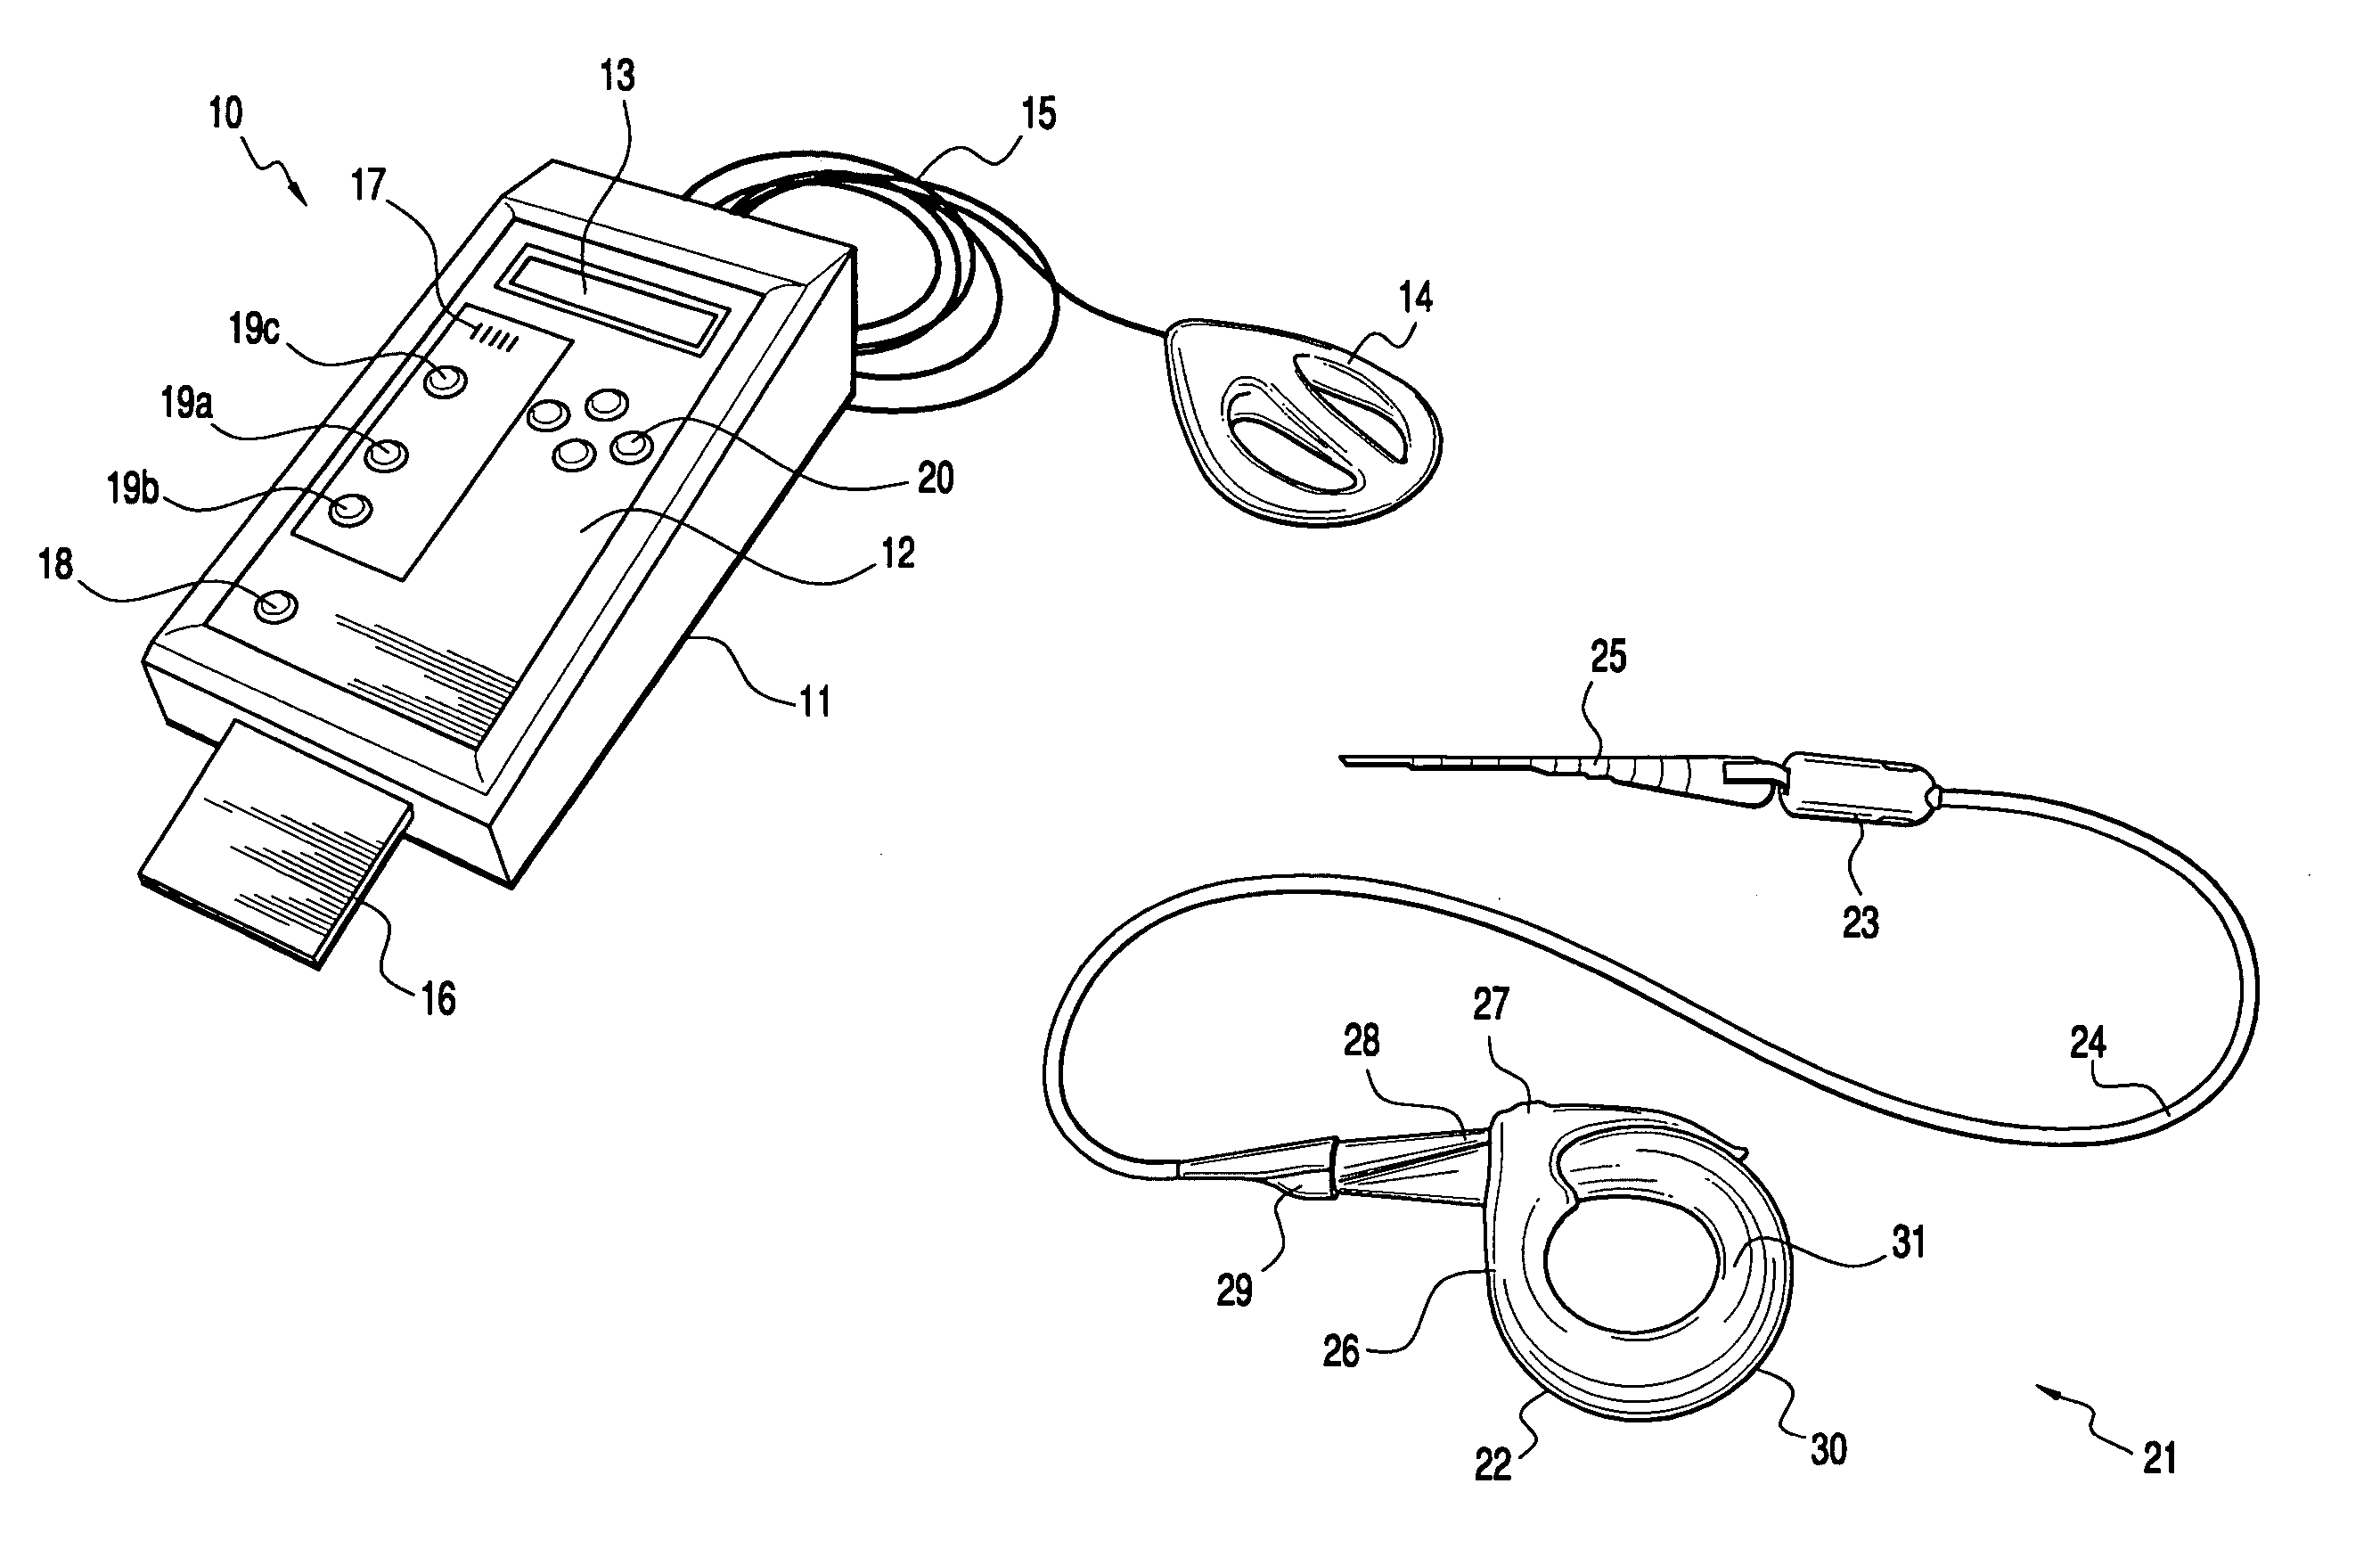 Telemetrically controlled band for regulating functioning of a body organ or duct, and methods of making, implantation and use